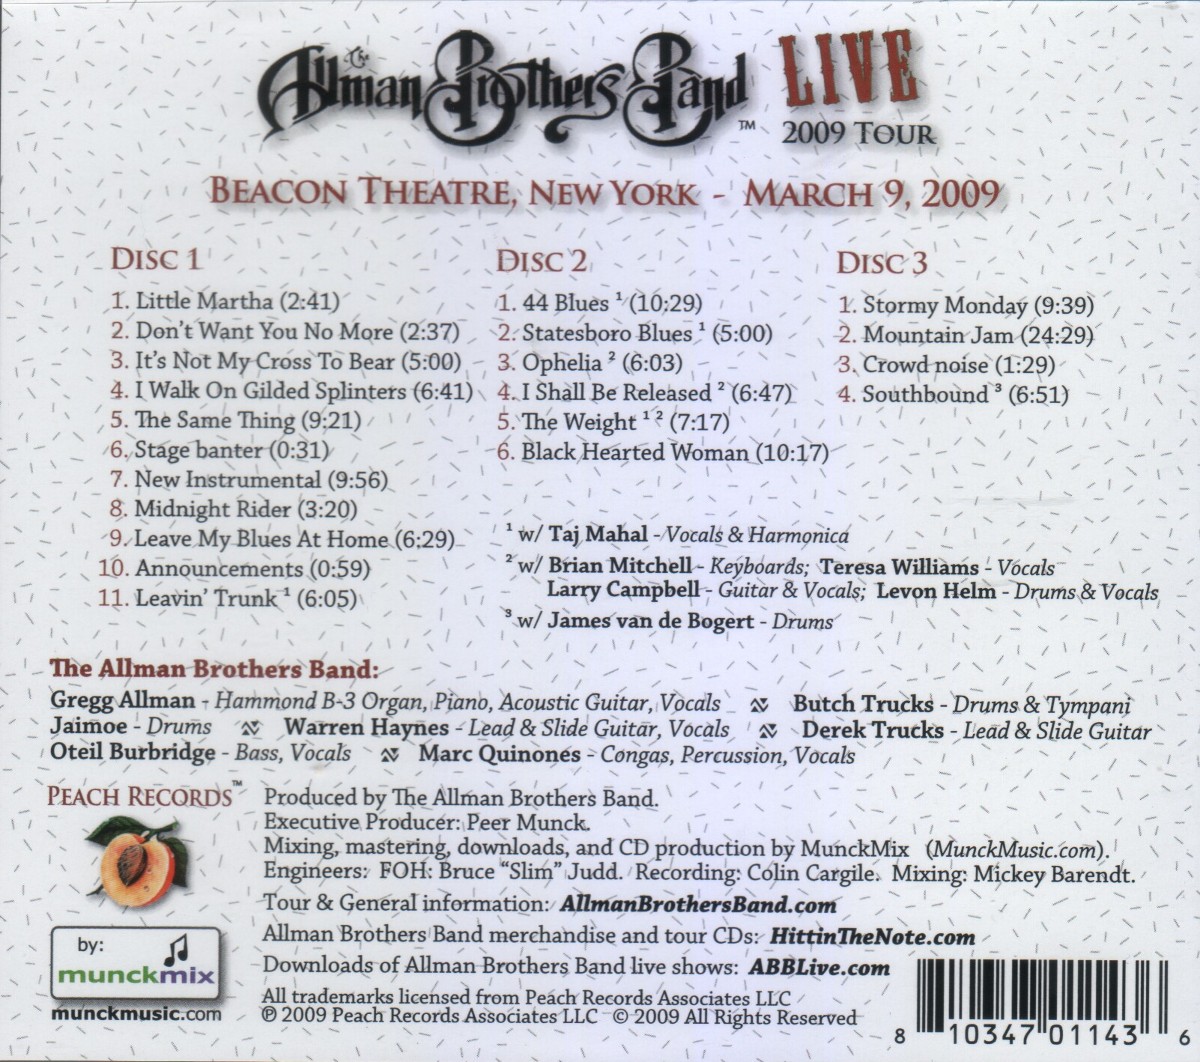 The Allman Brothers Band: Live Beacon Theatre 3/9/09